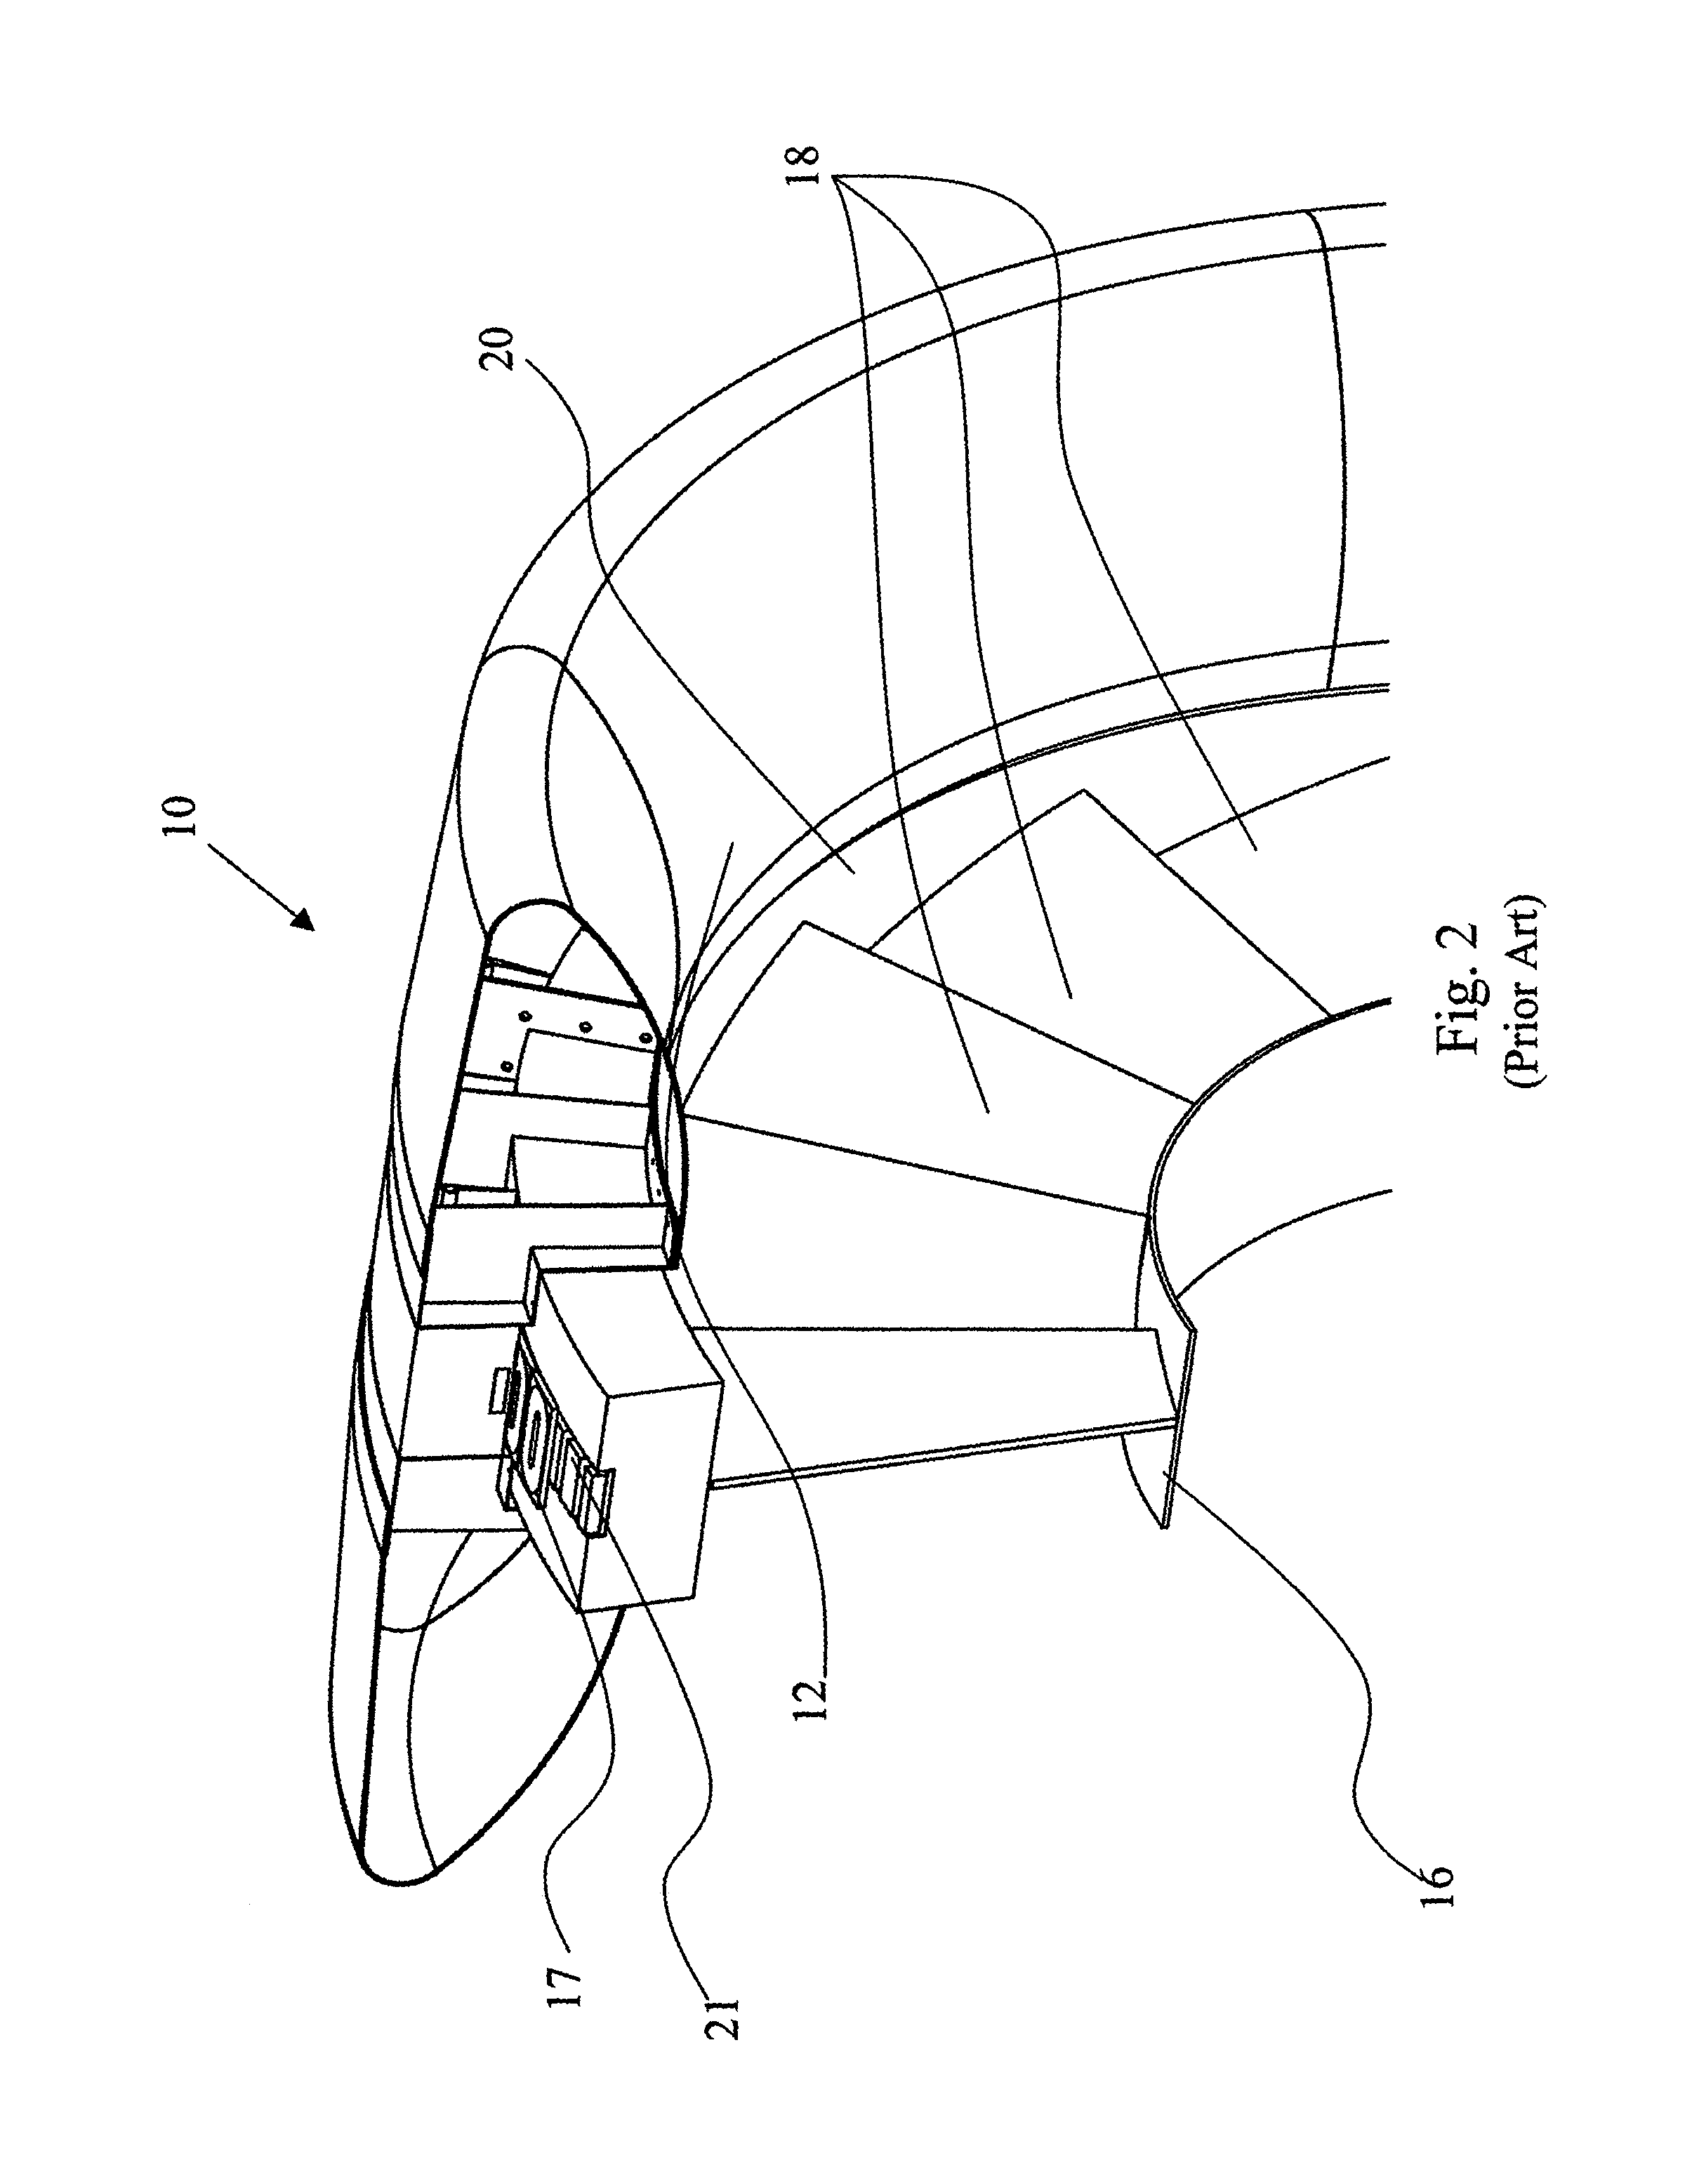 Enhanced method of controlling the output of a hydroelectric turbine generator